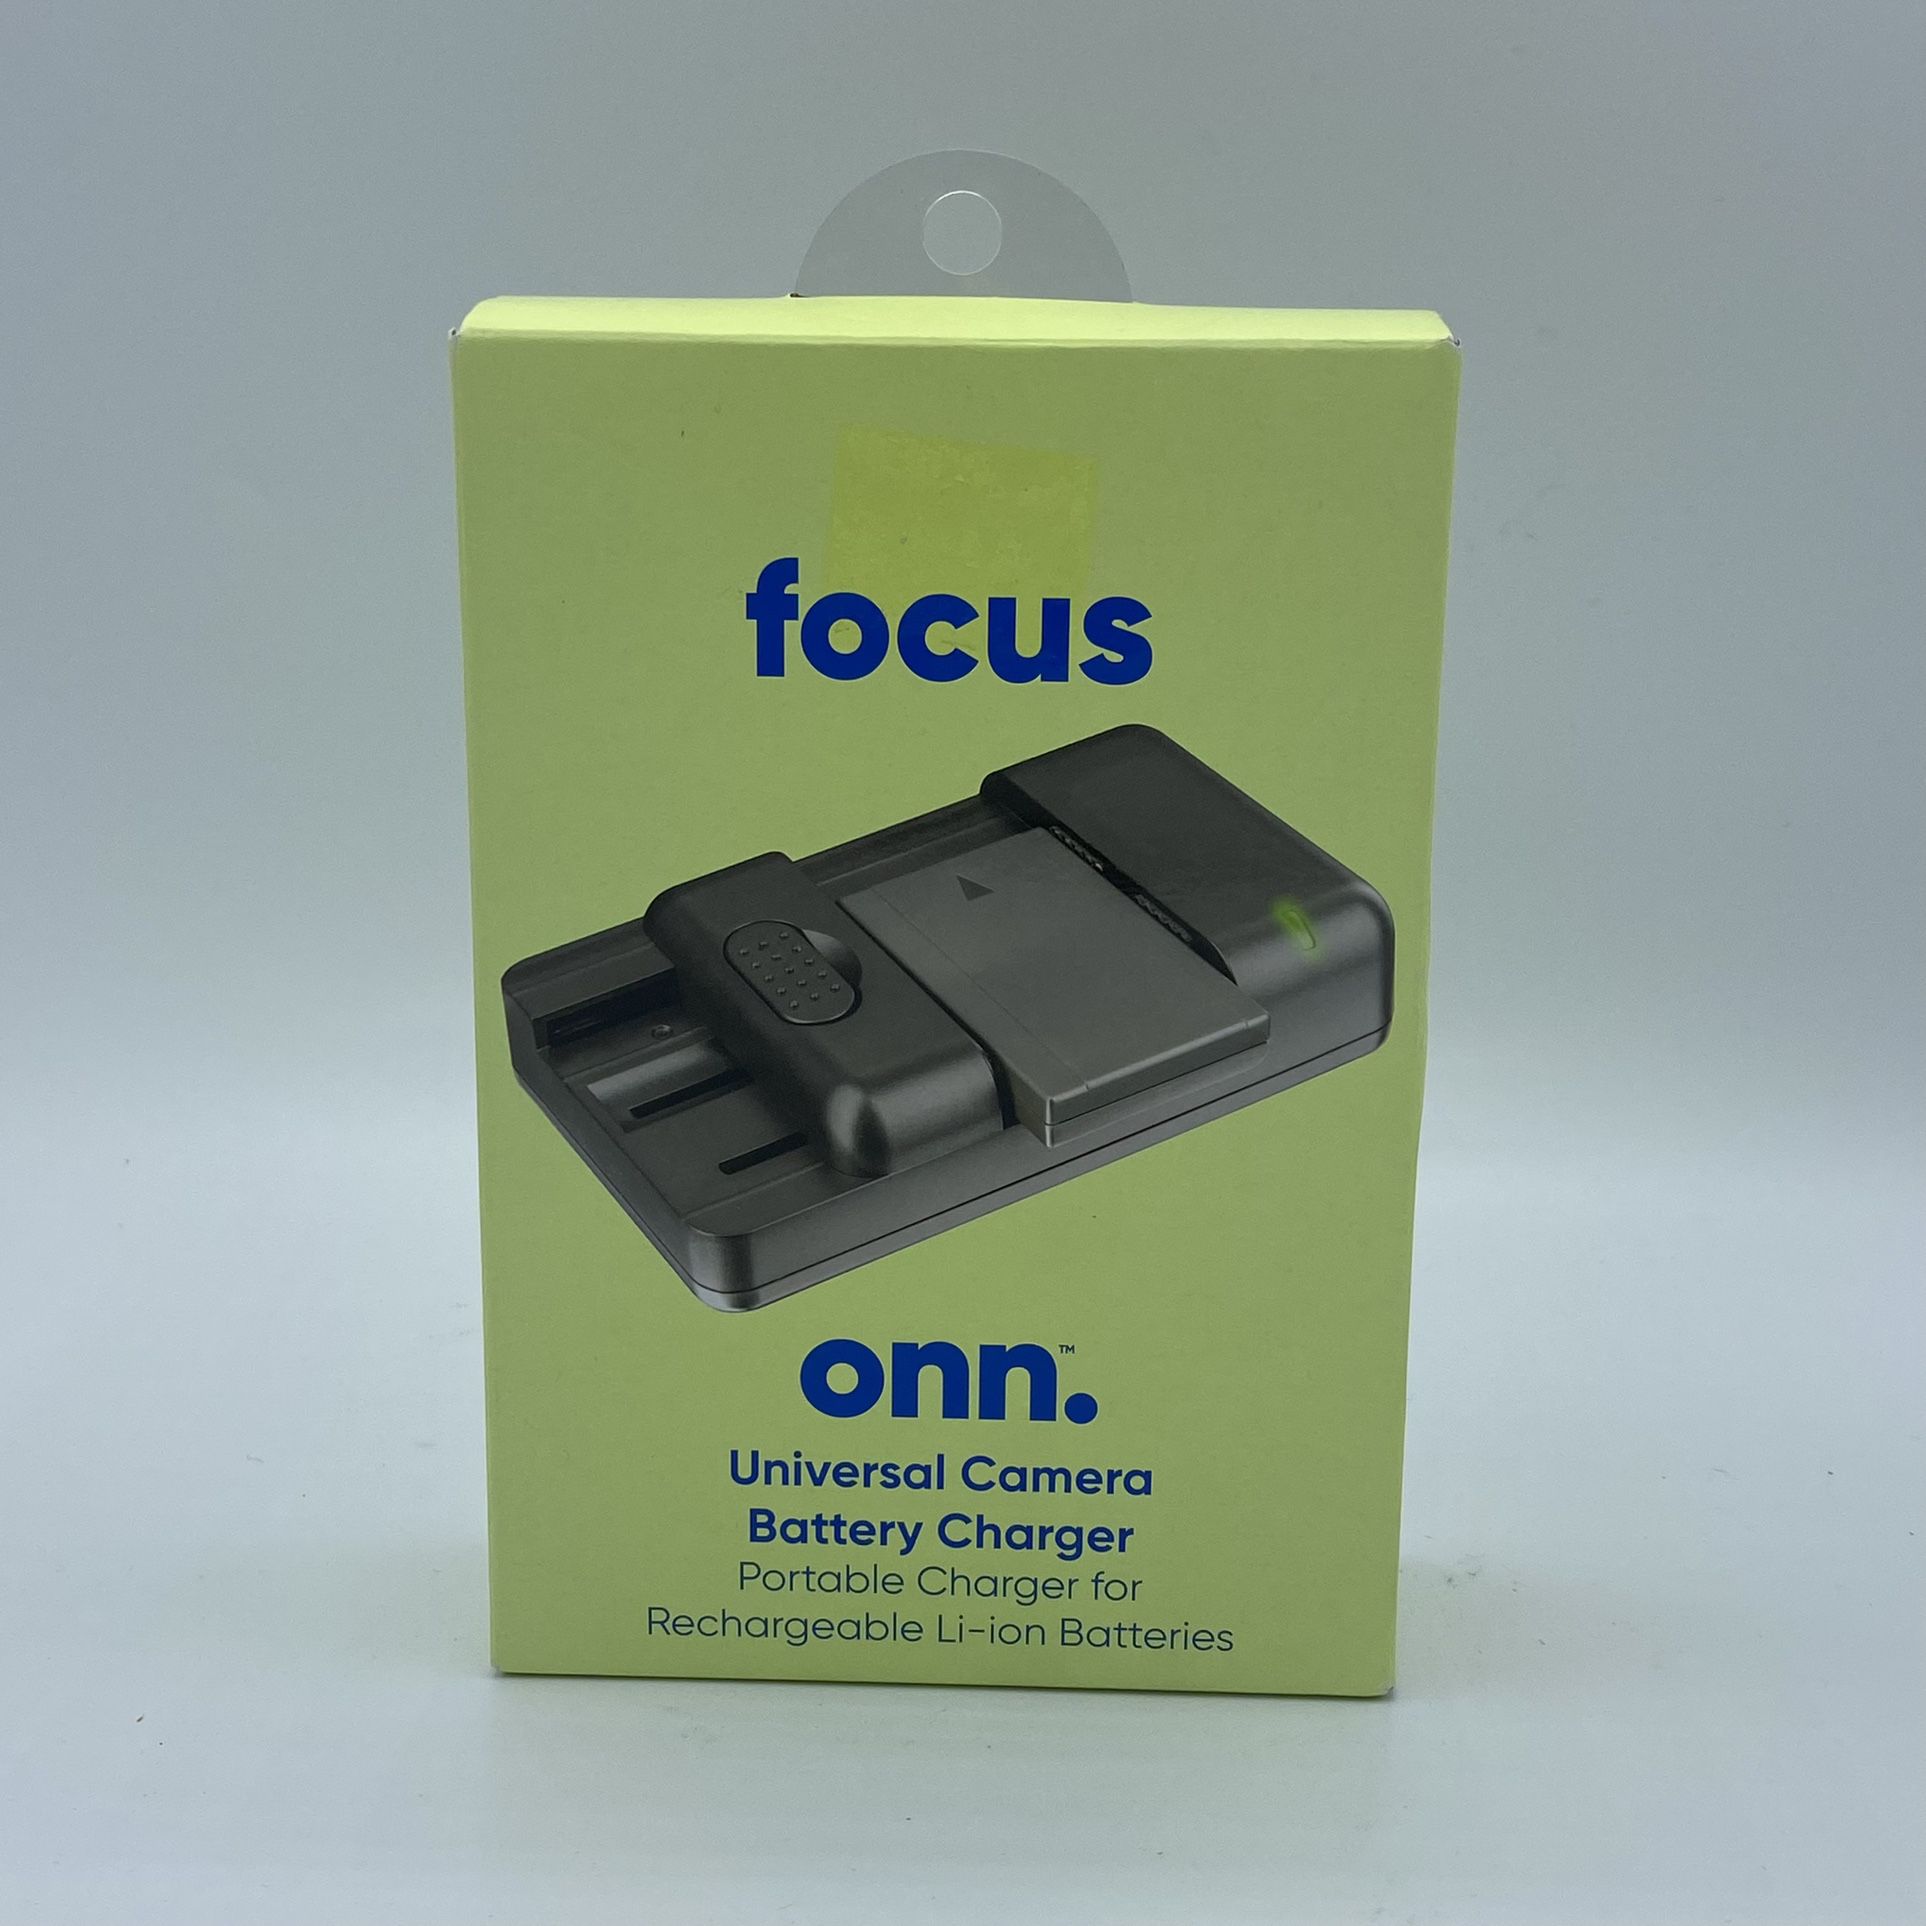 Onn Focus Universal Camera Battery Charger Model 100012672 with Wall & Car Adap